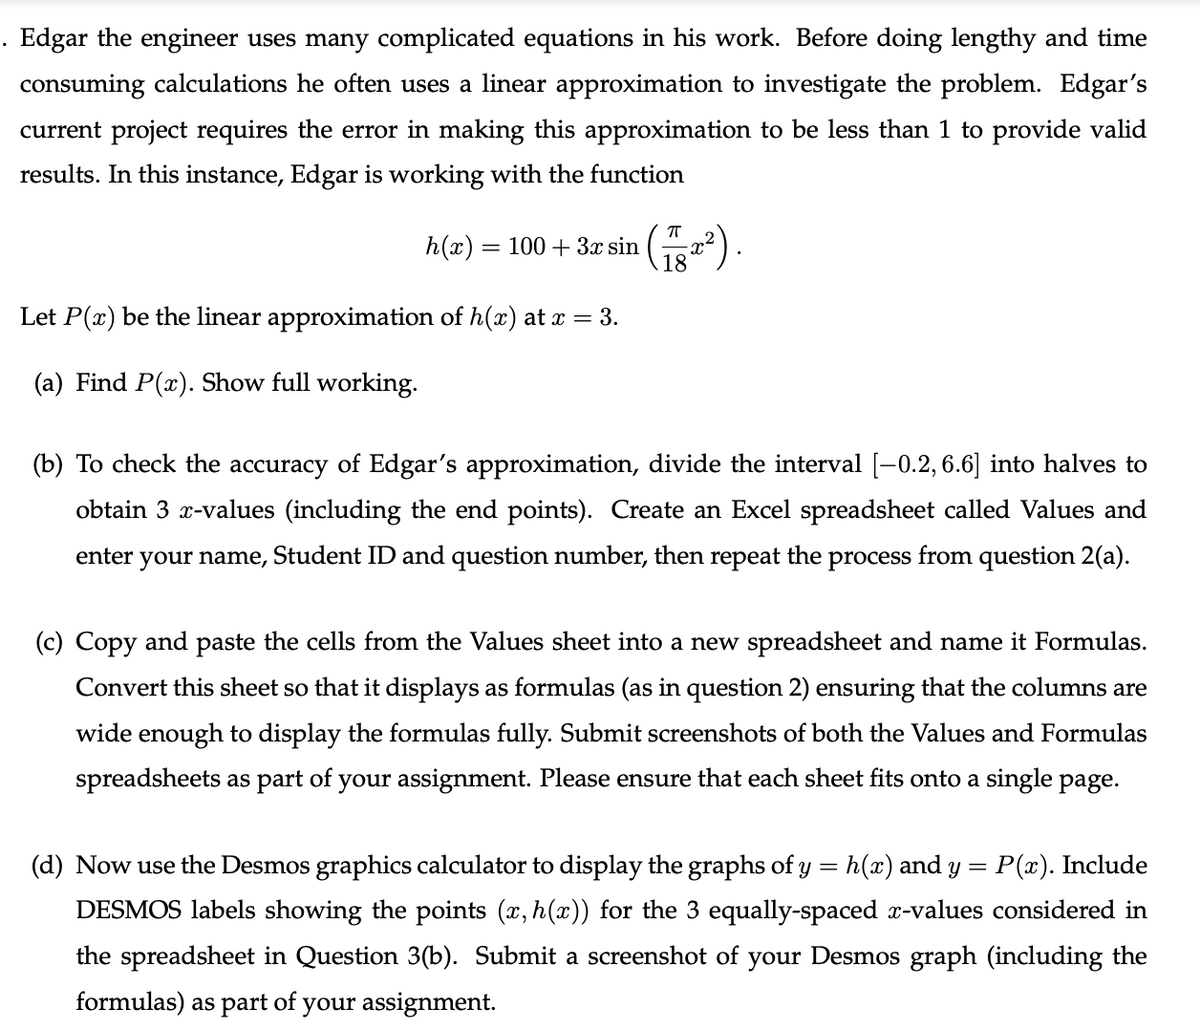 . Edgar the engineer uses many complicated equations in his work. Before doing lengthy and time
consuming calculations he often uses a linear approximation to investigate the problem. Edgar's
current project requires the error in making this approximation to be less than 1 to provide valid
results. In this instance, Edgar is working with the function
h(x) :
= 100 + 3x sin
Let P(x) be the linear approximation of h(x) at x = 3.
(a) Find P(x). Show full working.
(b) To check the accuracy of Edgar's approximation, divide the interval [-0.2, 6.6] into halves to
obtain 3 x-values (including the end points). Create an Excel spreadsheet called Values and
enter
your name, Student ID and question number, then repeat the process from question 2(a).
(c) Copy and paste the cells from the Values sheet into a new spreadsheet and name it Formulas.
Convert this sheet so that it displays as formulas (as in question 2) ensuring that the columns are
wide enough to display the formulas fully. Submit screenshots of both the Values and Formulas
spreadsheets as part of your assignment. Please ensure that each sheet fits onto a single page.
(d) Now use the Desmos graphics calculator to display the graphs of y = h(x) and y = P(x). Include
DESMOS labels showing the points (x, h(x)) for the 3 equally-spaced x-values considered in
the spreadsheet in Question 3(b). Submit a screenshot of your Desmos graph (including the
formulas) as part of your assignment.
